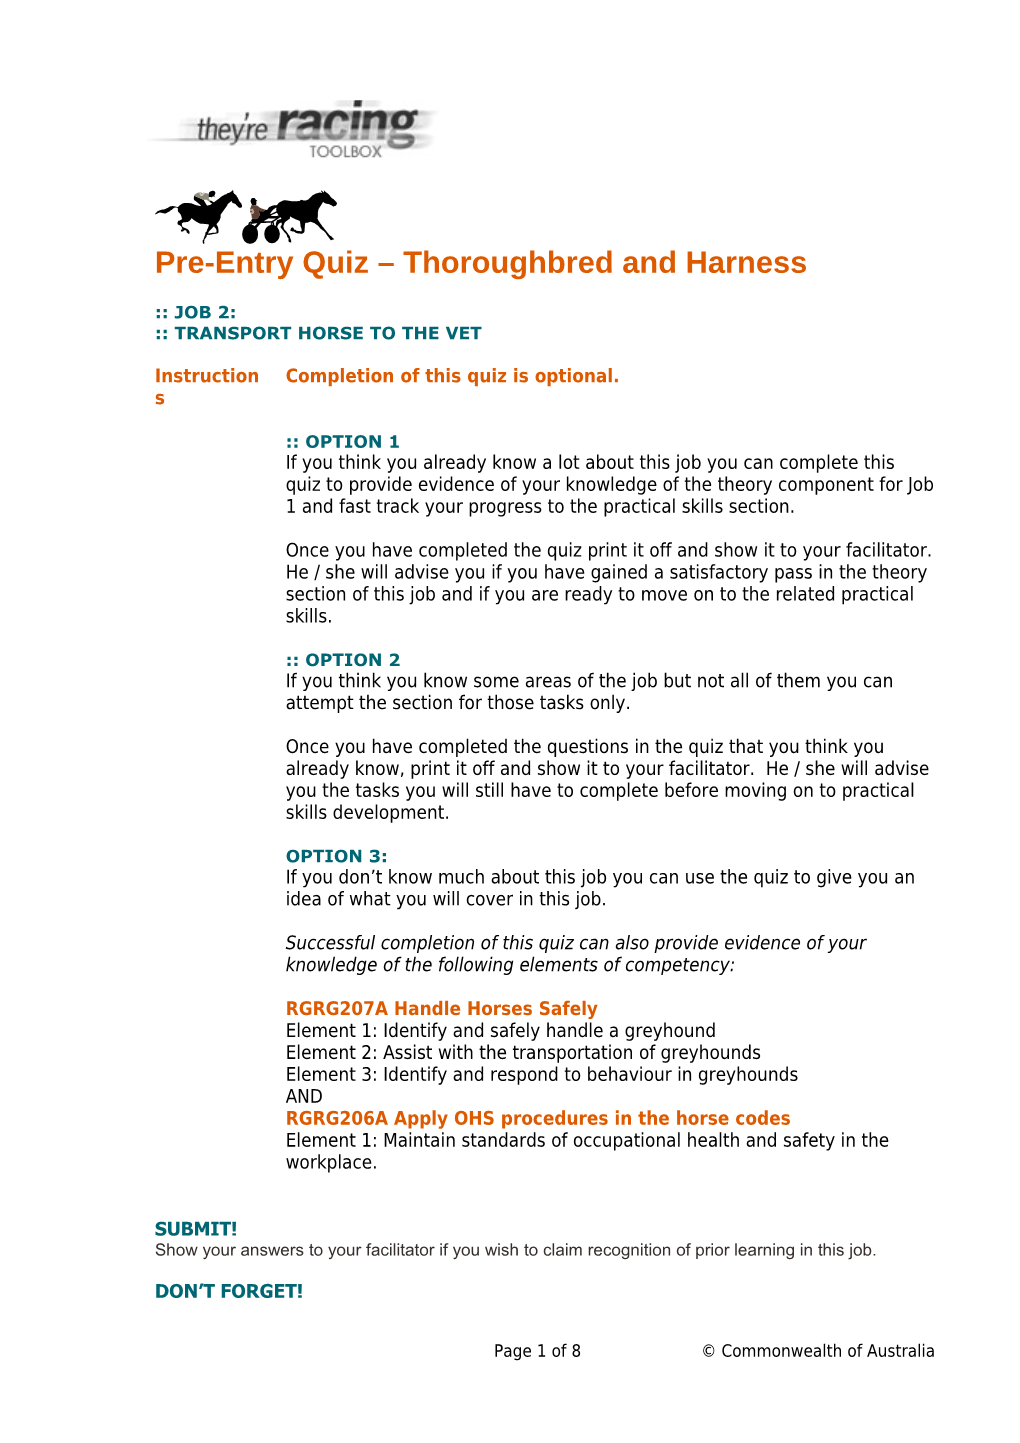 Pre-Entry Quiz Thoroughbred and Harness